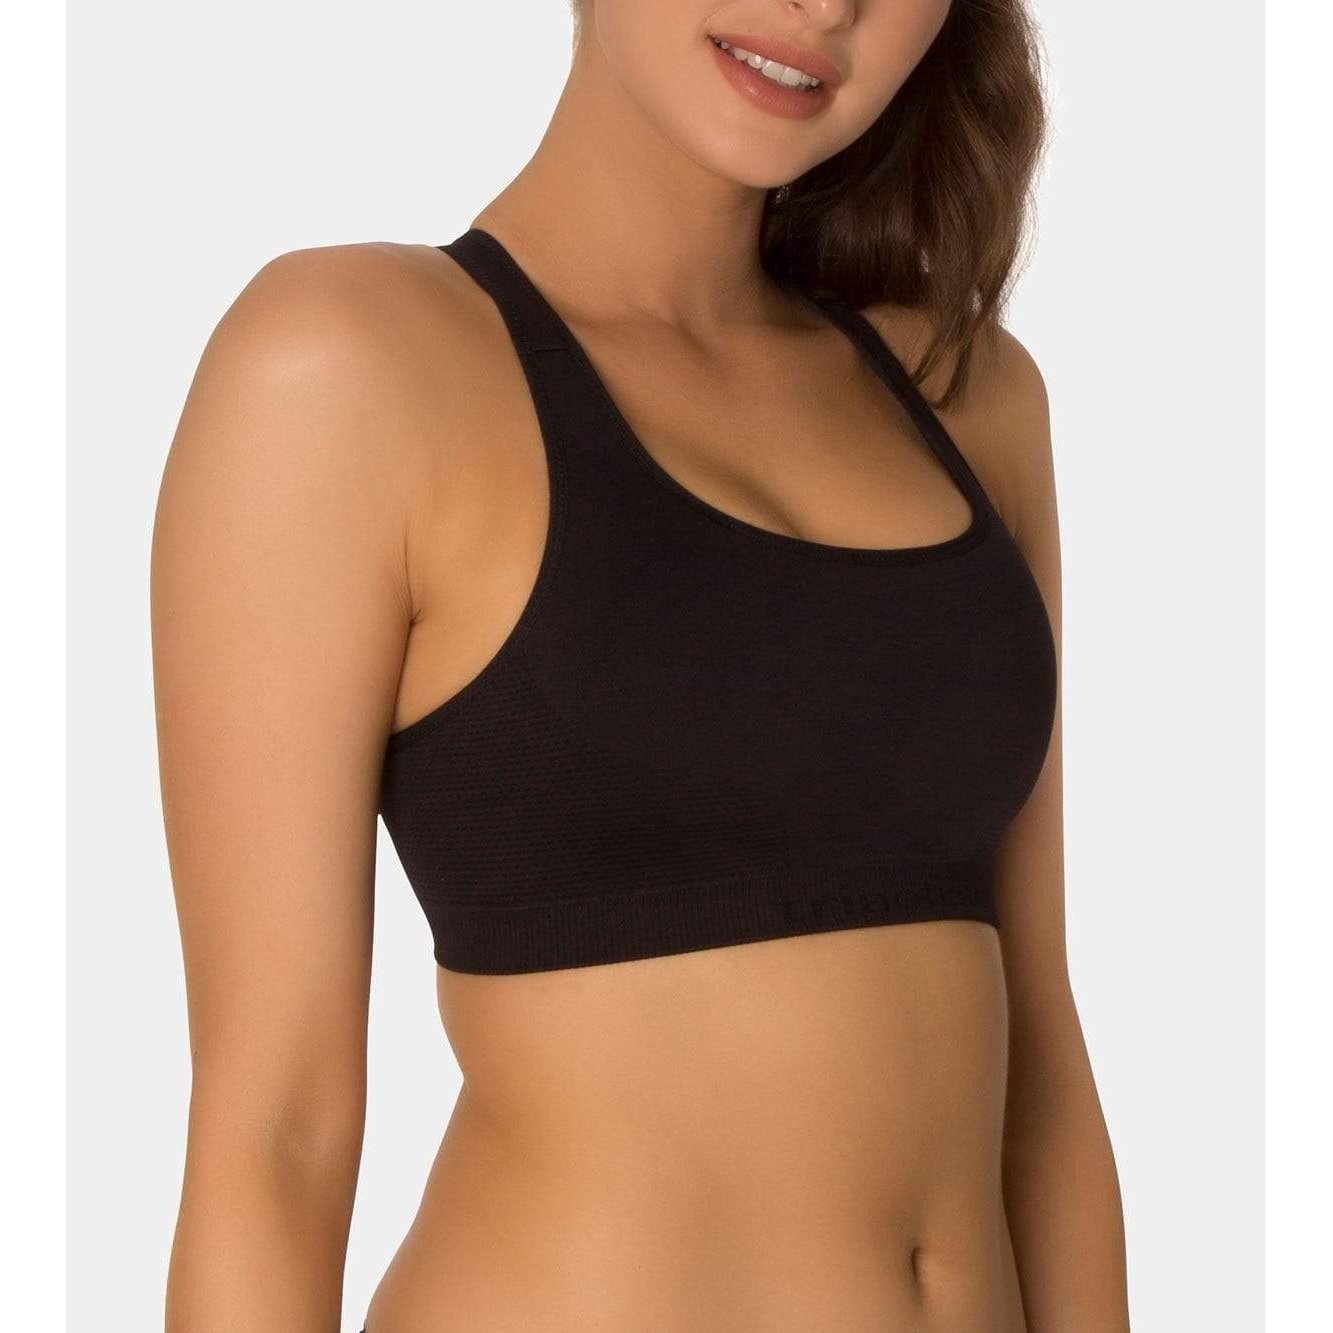 Triumph Sports Bra Triaction Seamfree Crop Top from Illusions Lingerie in Melbourne